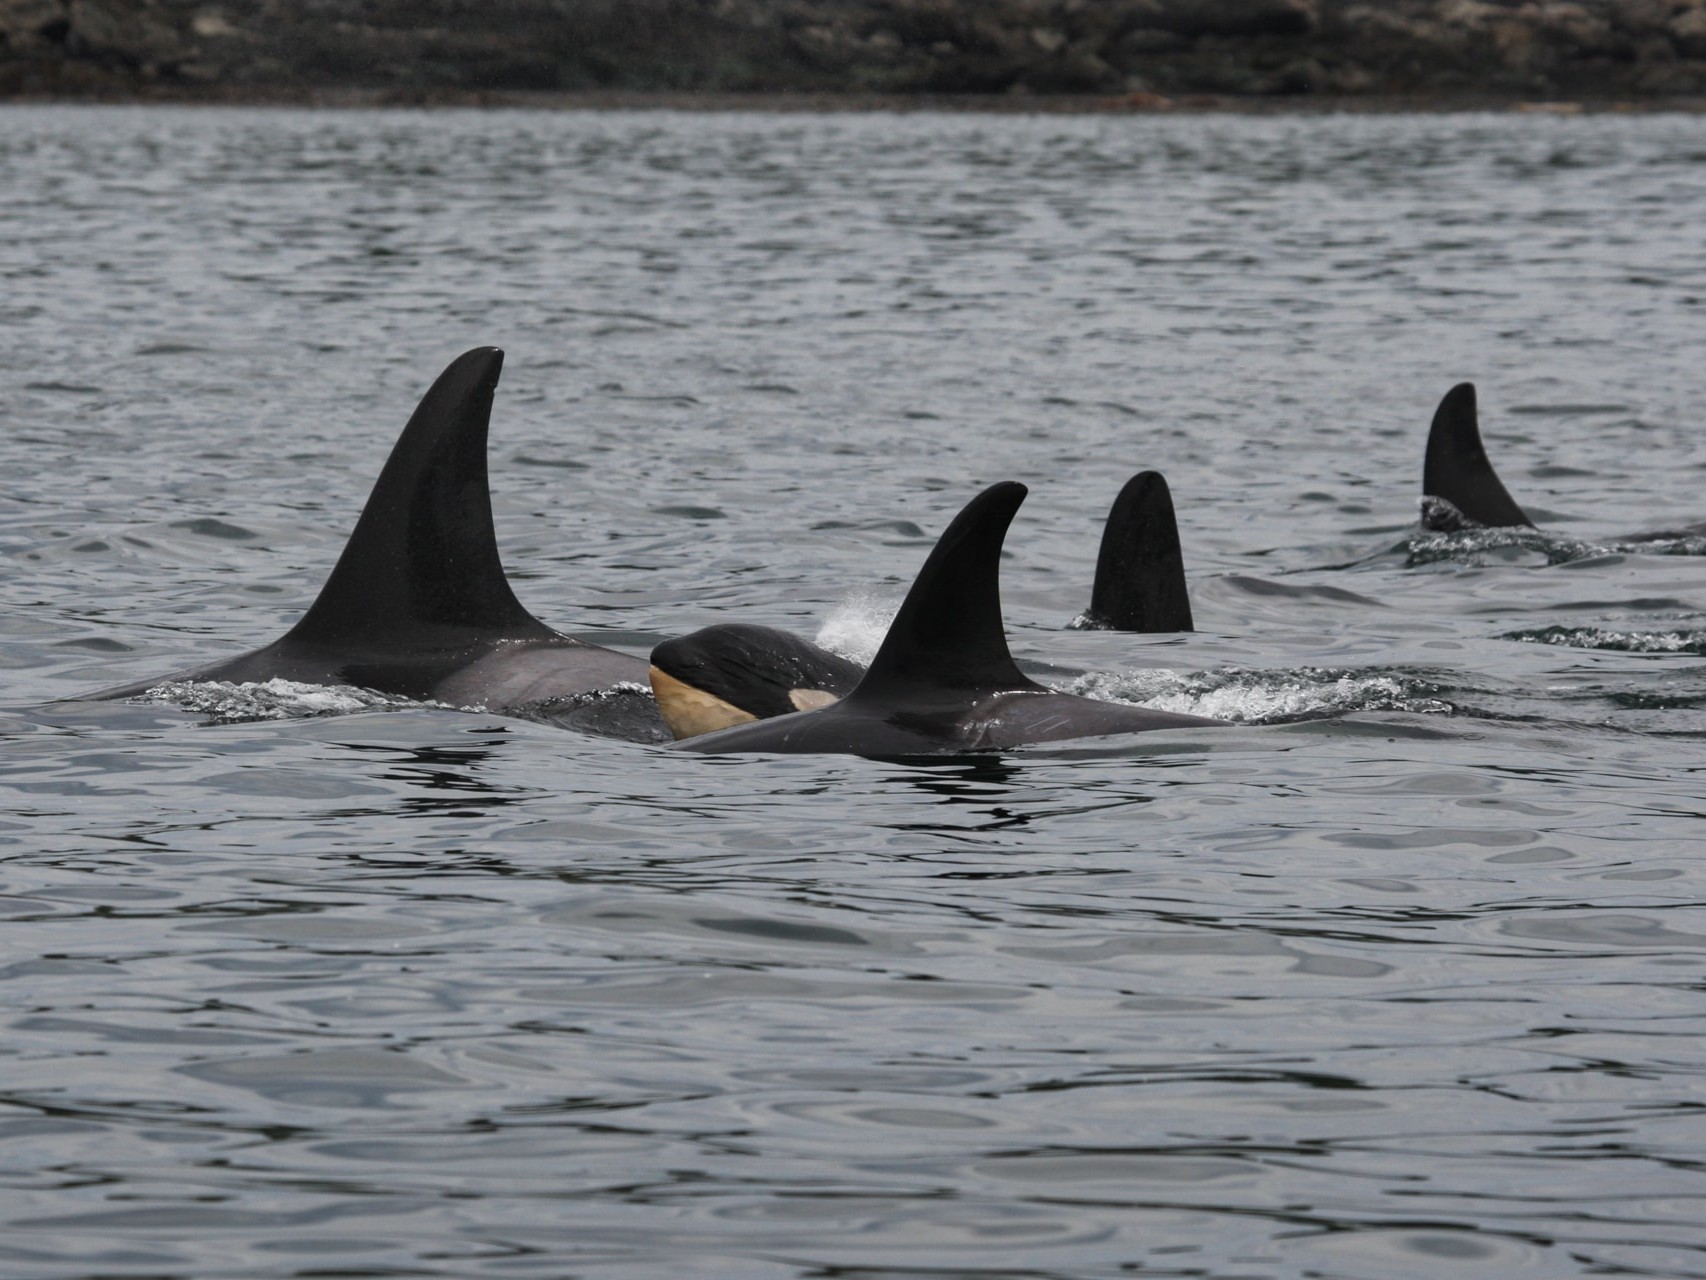 A group of Southern Resident killer whales swimming with a calf.